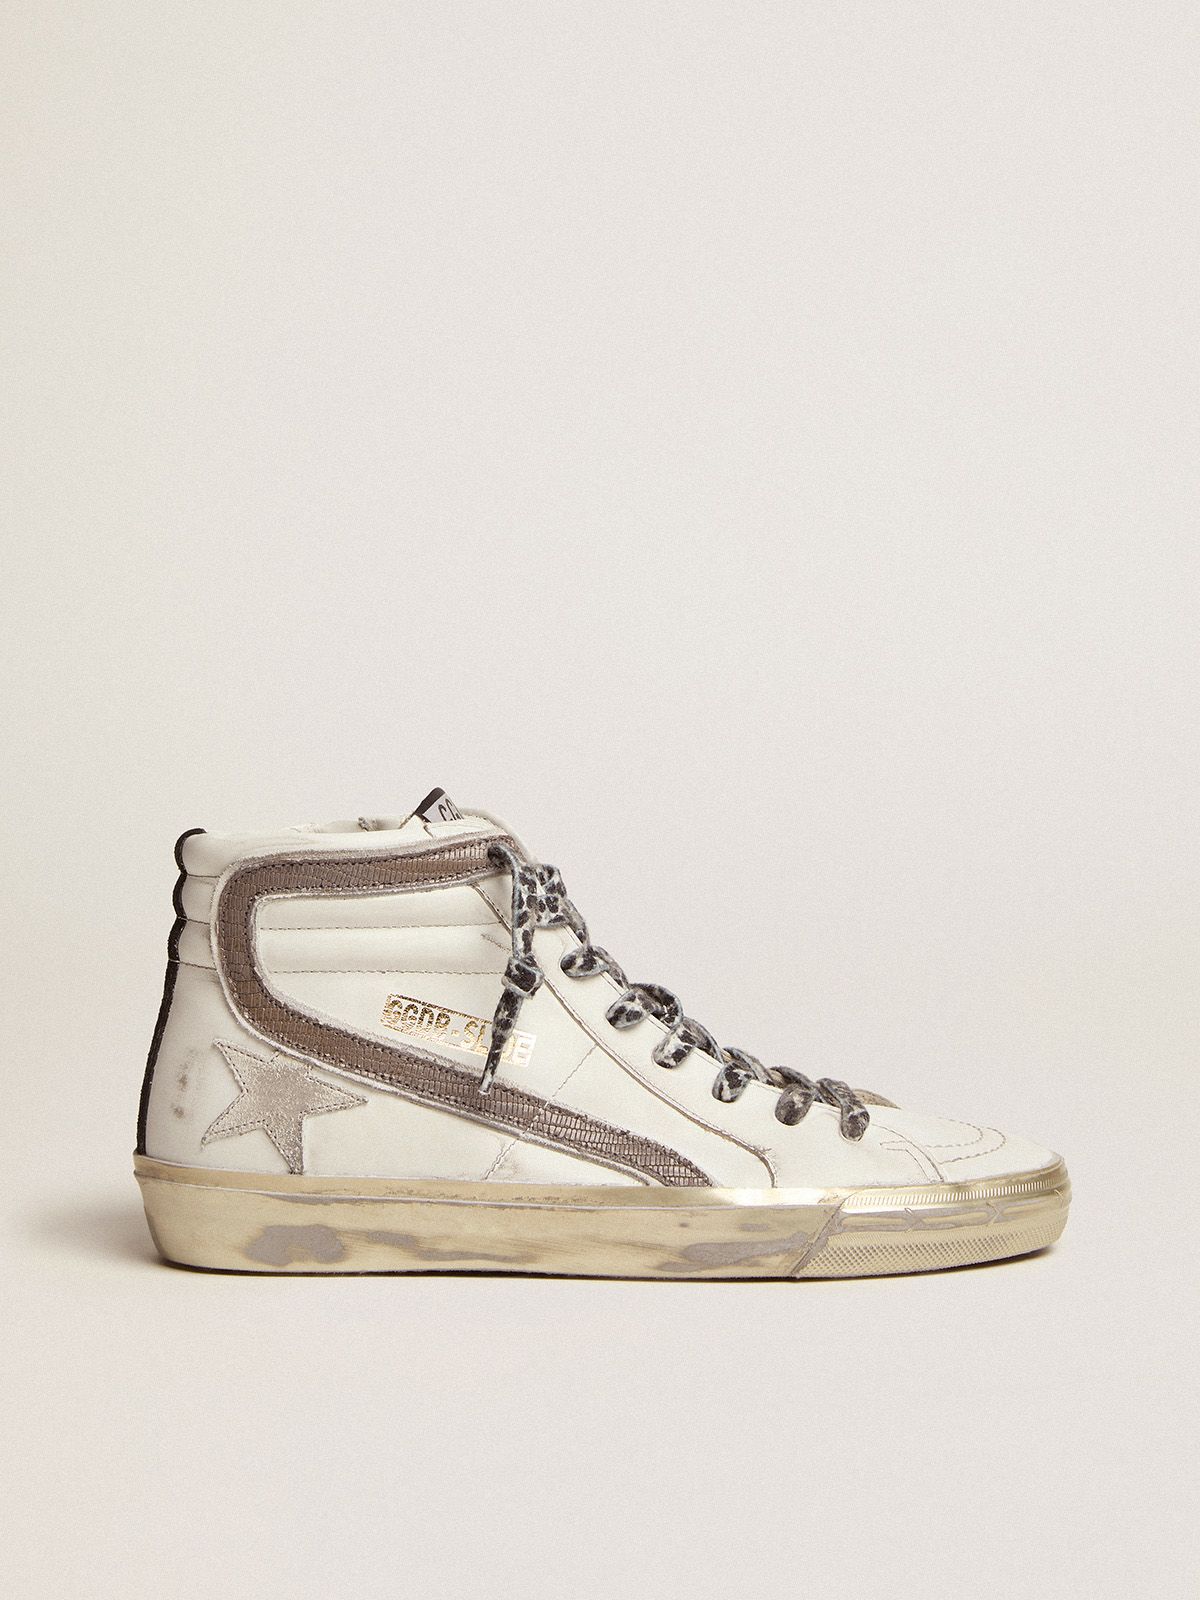 golden goose suede Slide sneakers white and with star lizard-print dove-gray flash leather